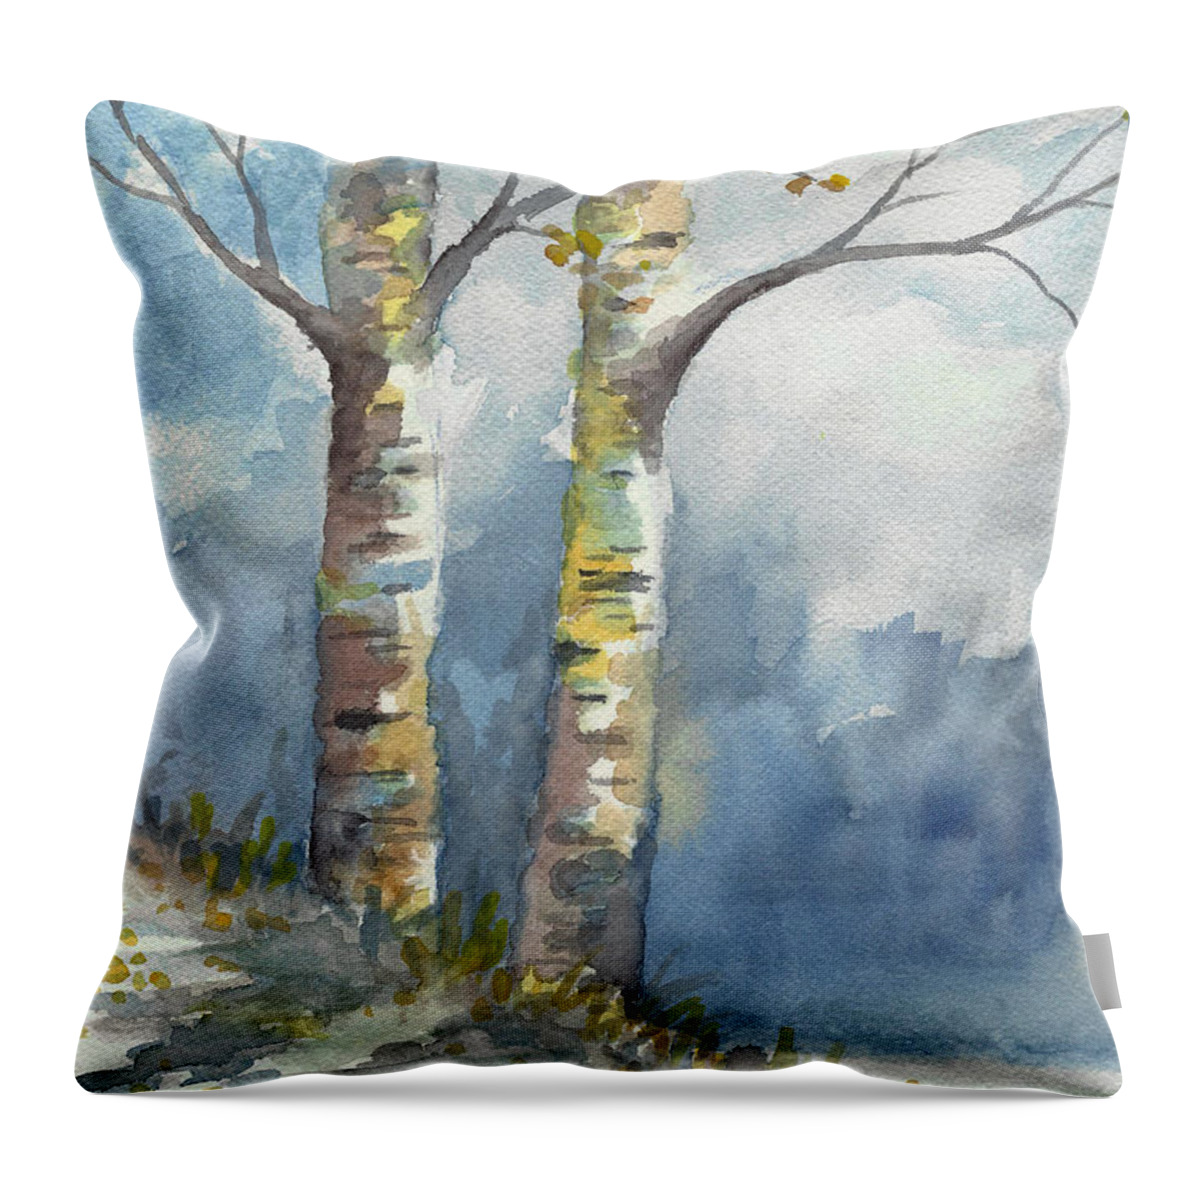 Autumn Throw Pillow featuring the painting Autumn's Last Breath by David G Paul